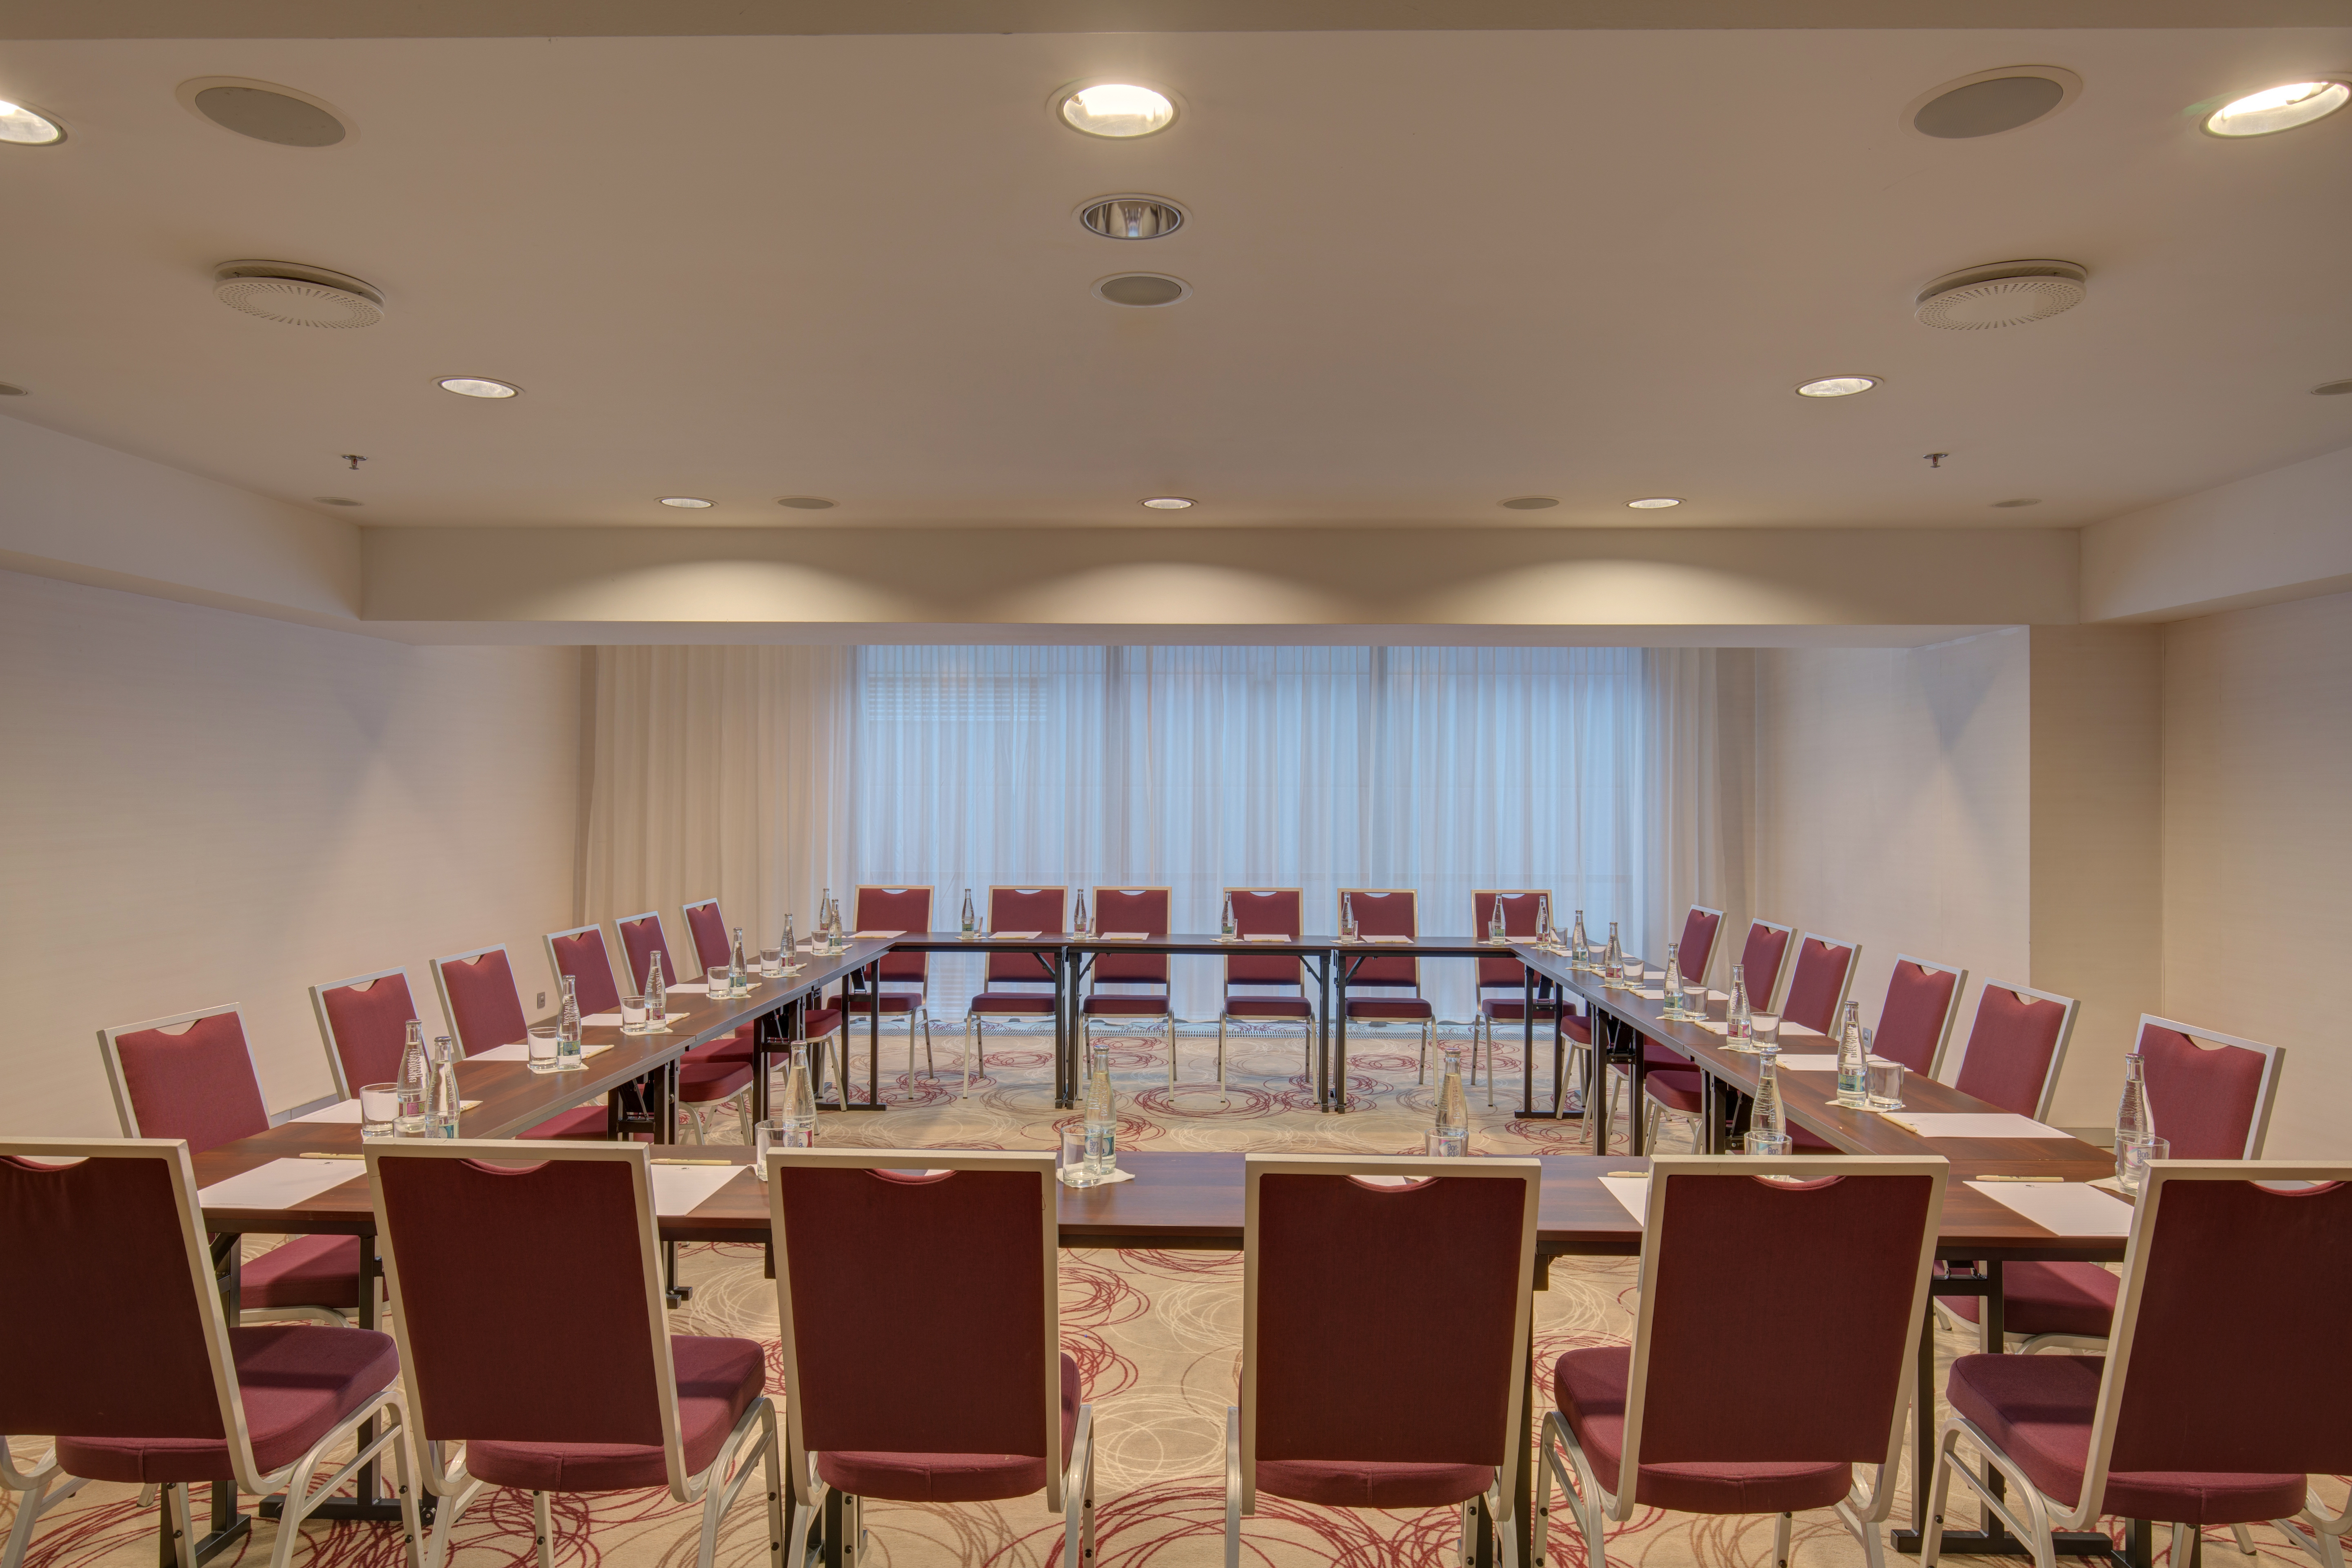 Chopin Meeting Room Setup Hollow Square Style